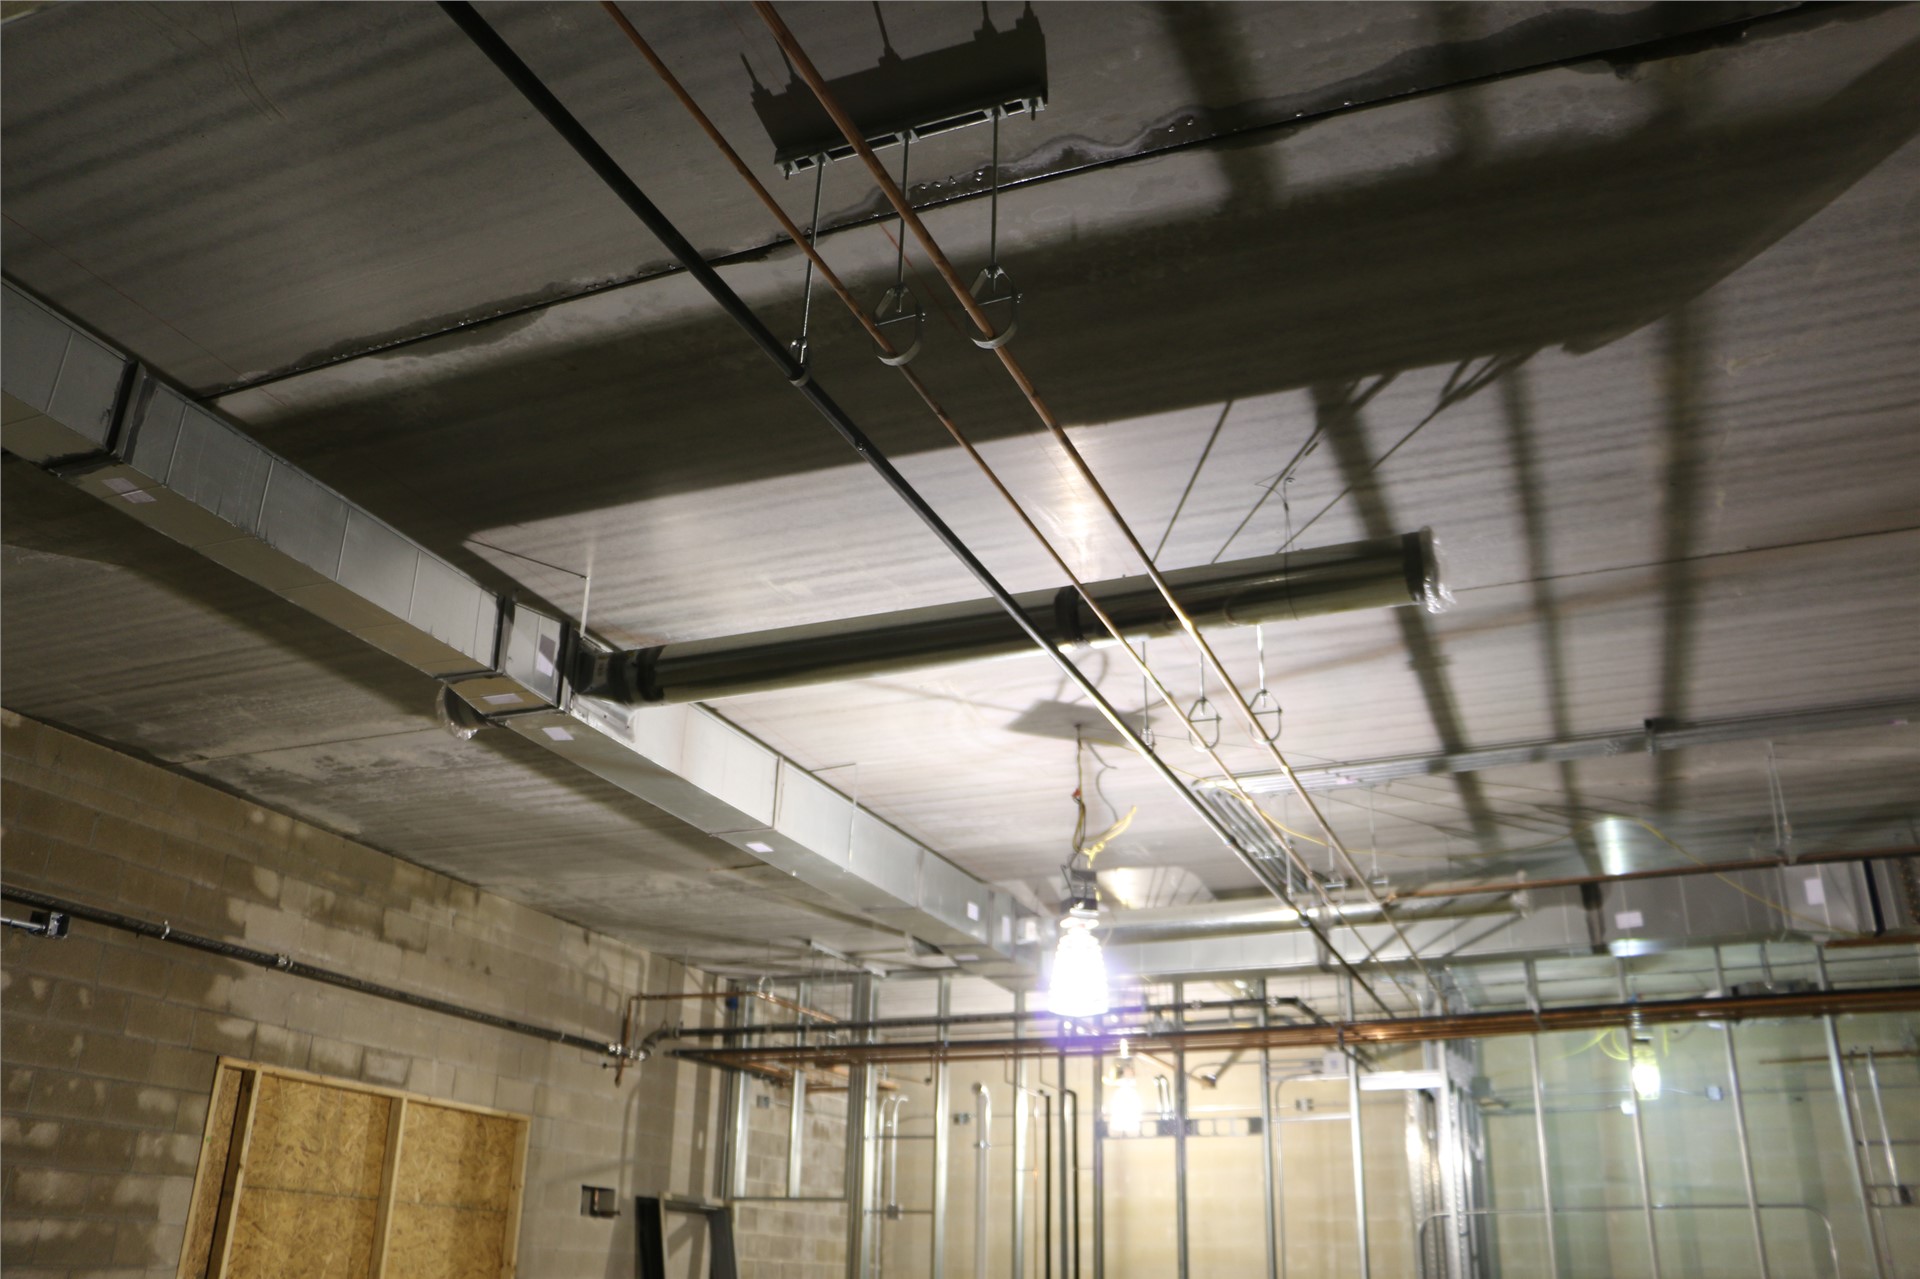 HVAC and plumbing in place